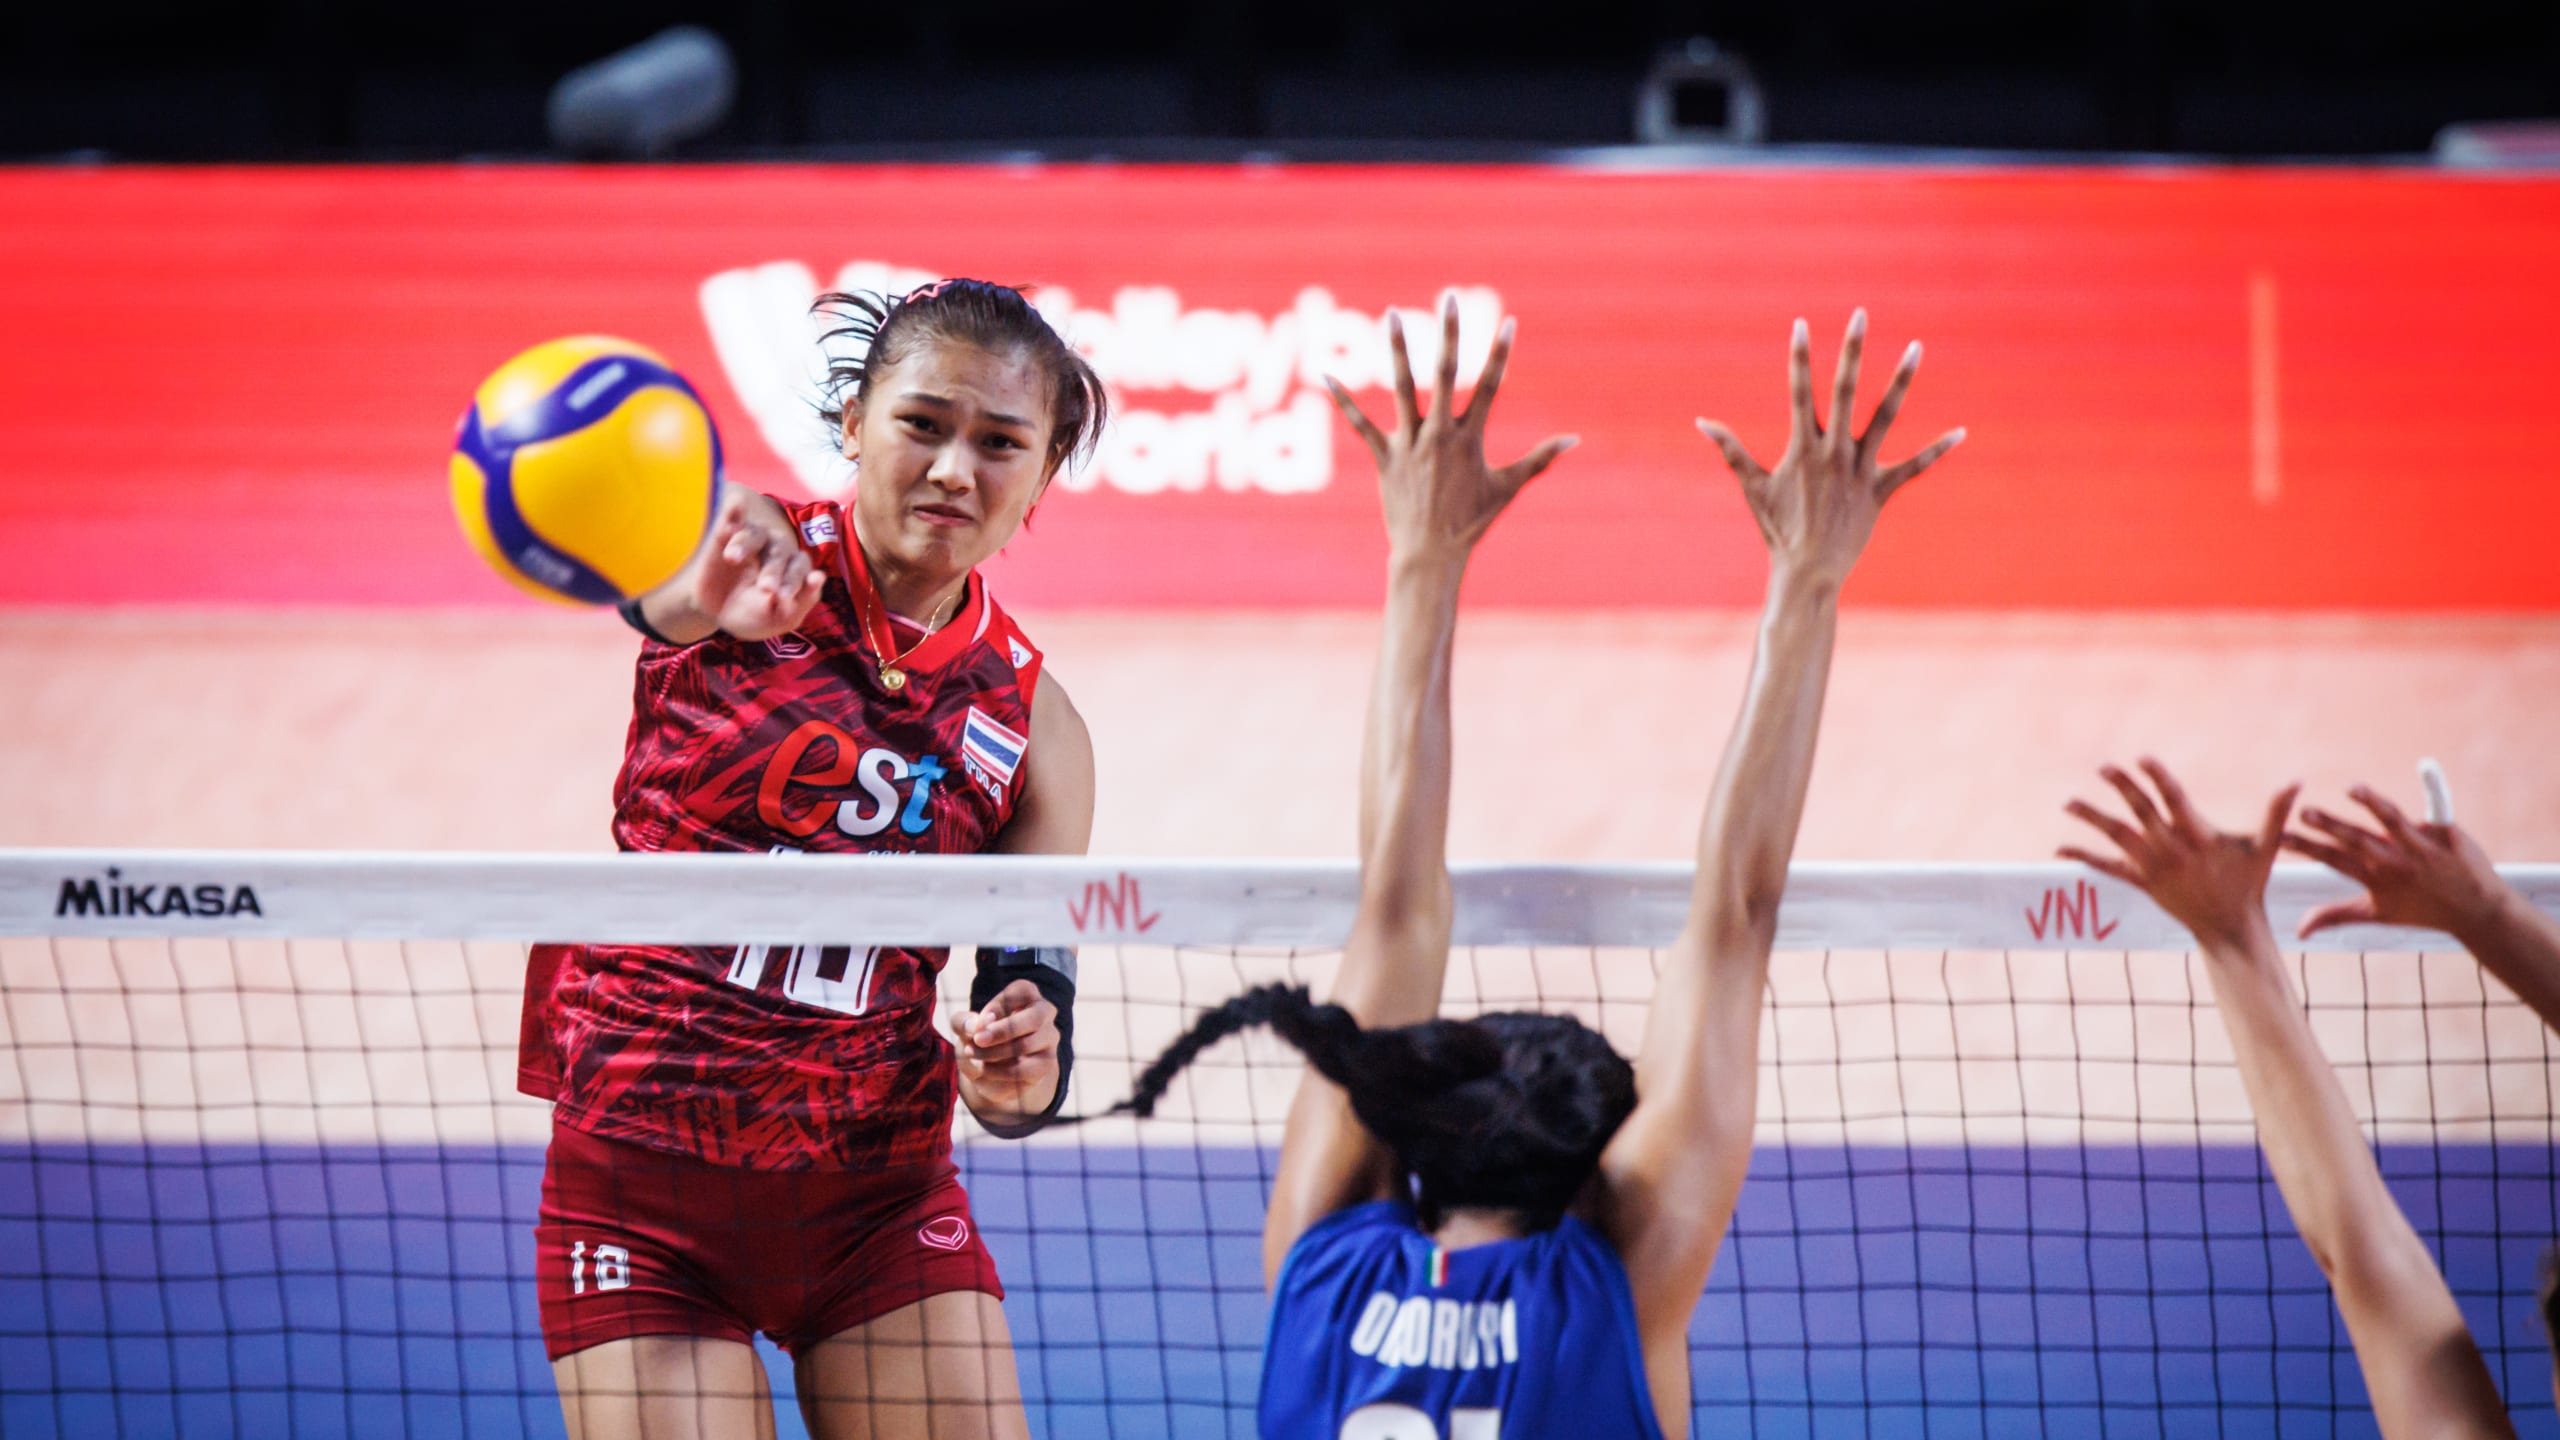 Pimpichaya played a fantastic match, but her efforts weren't enough to give Thailand the win